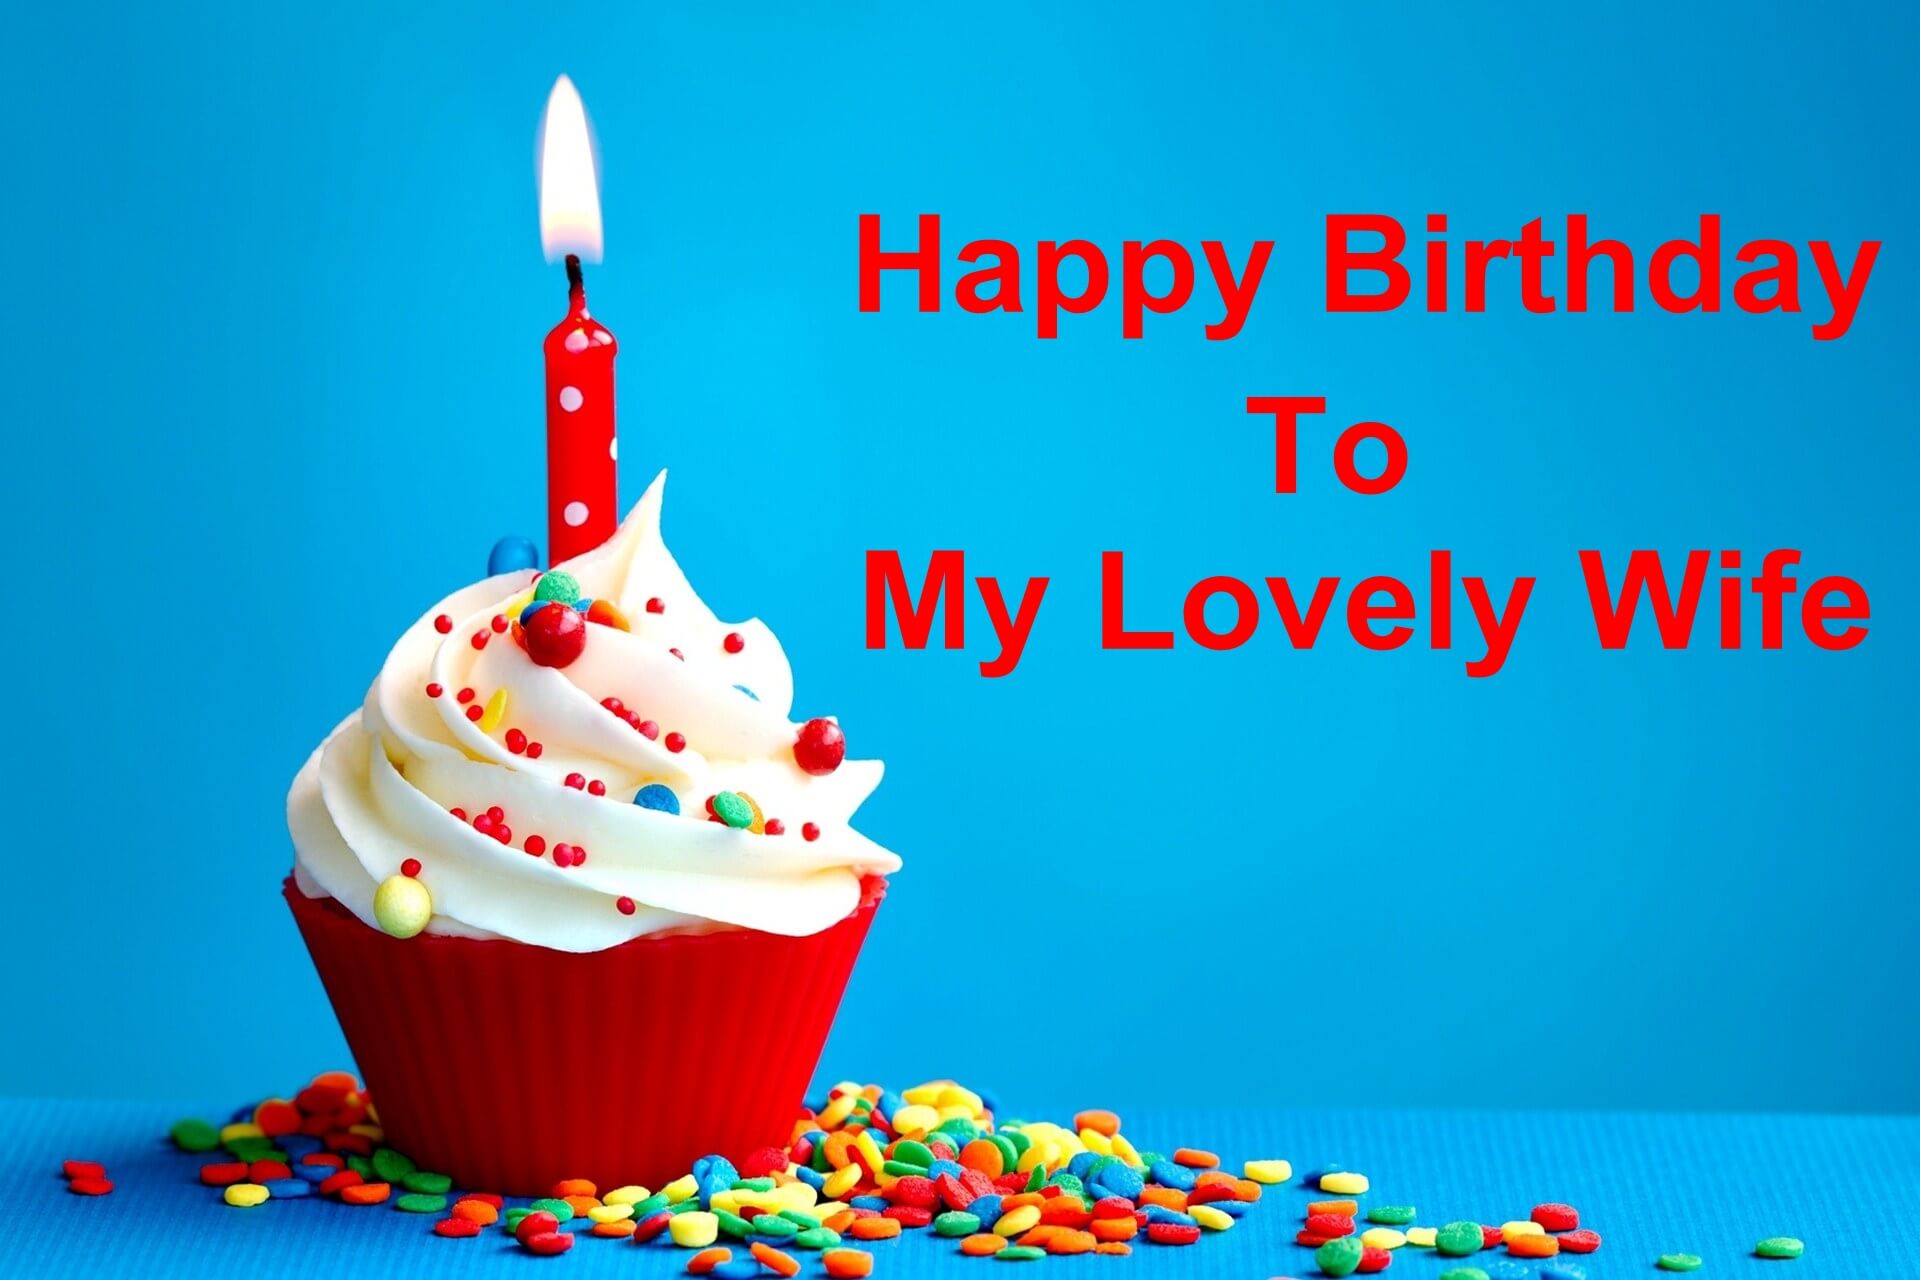 65+ Happy Birthday Wishes For Wife – Status, Quotes, Greeting Cards, Cake Images, Messages,